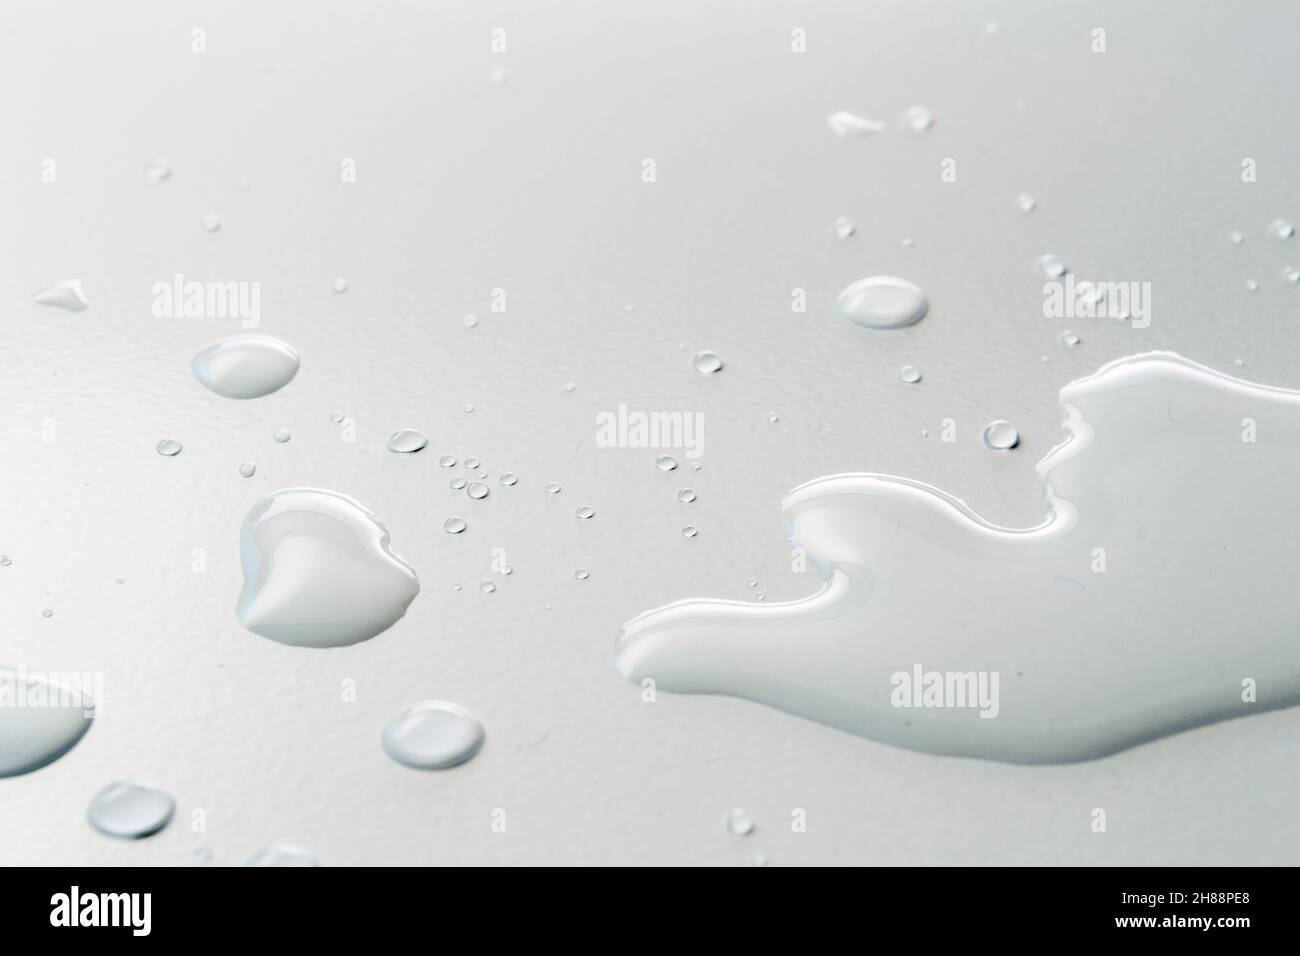 wet clean white surface close up Stock Photo